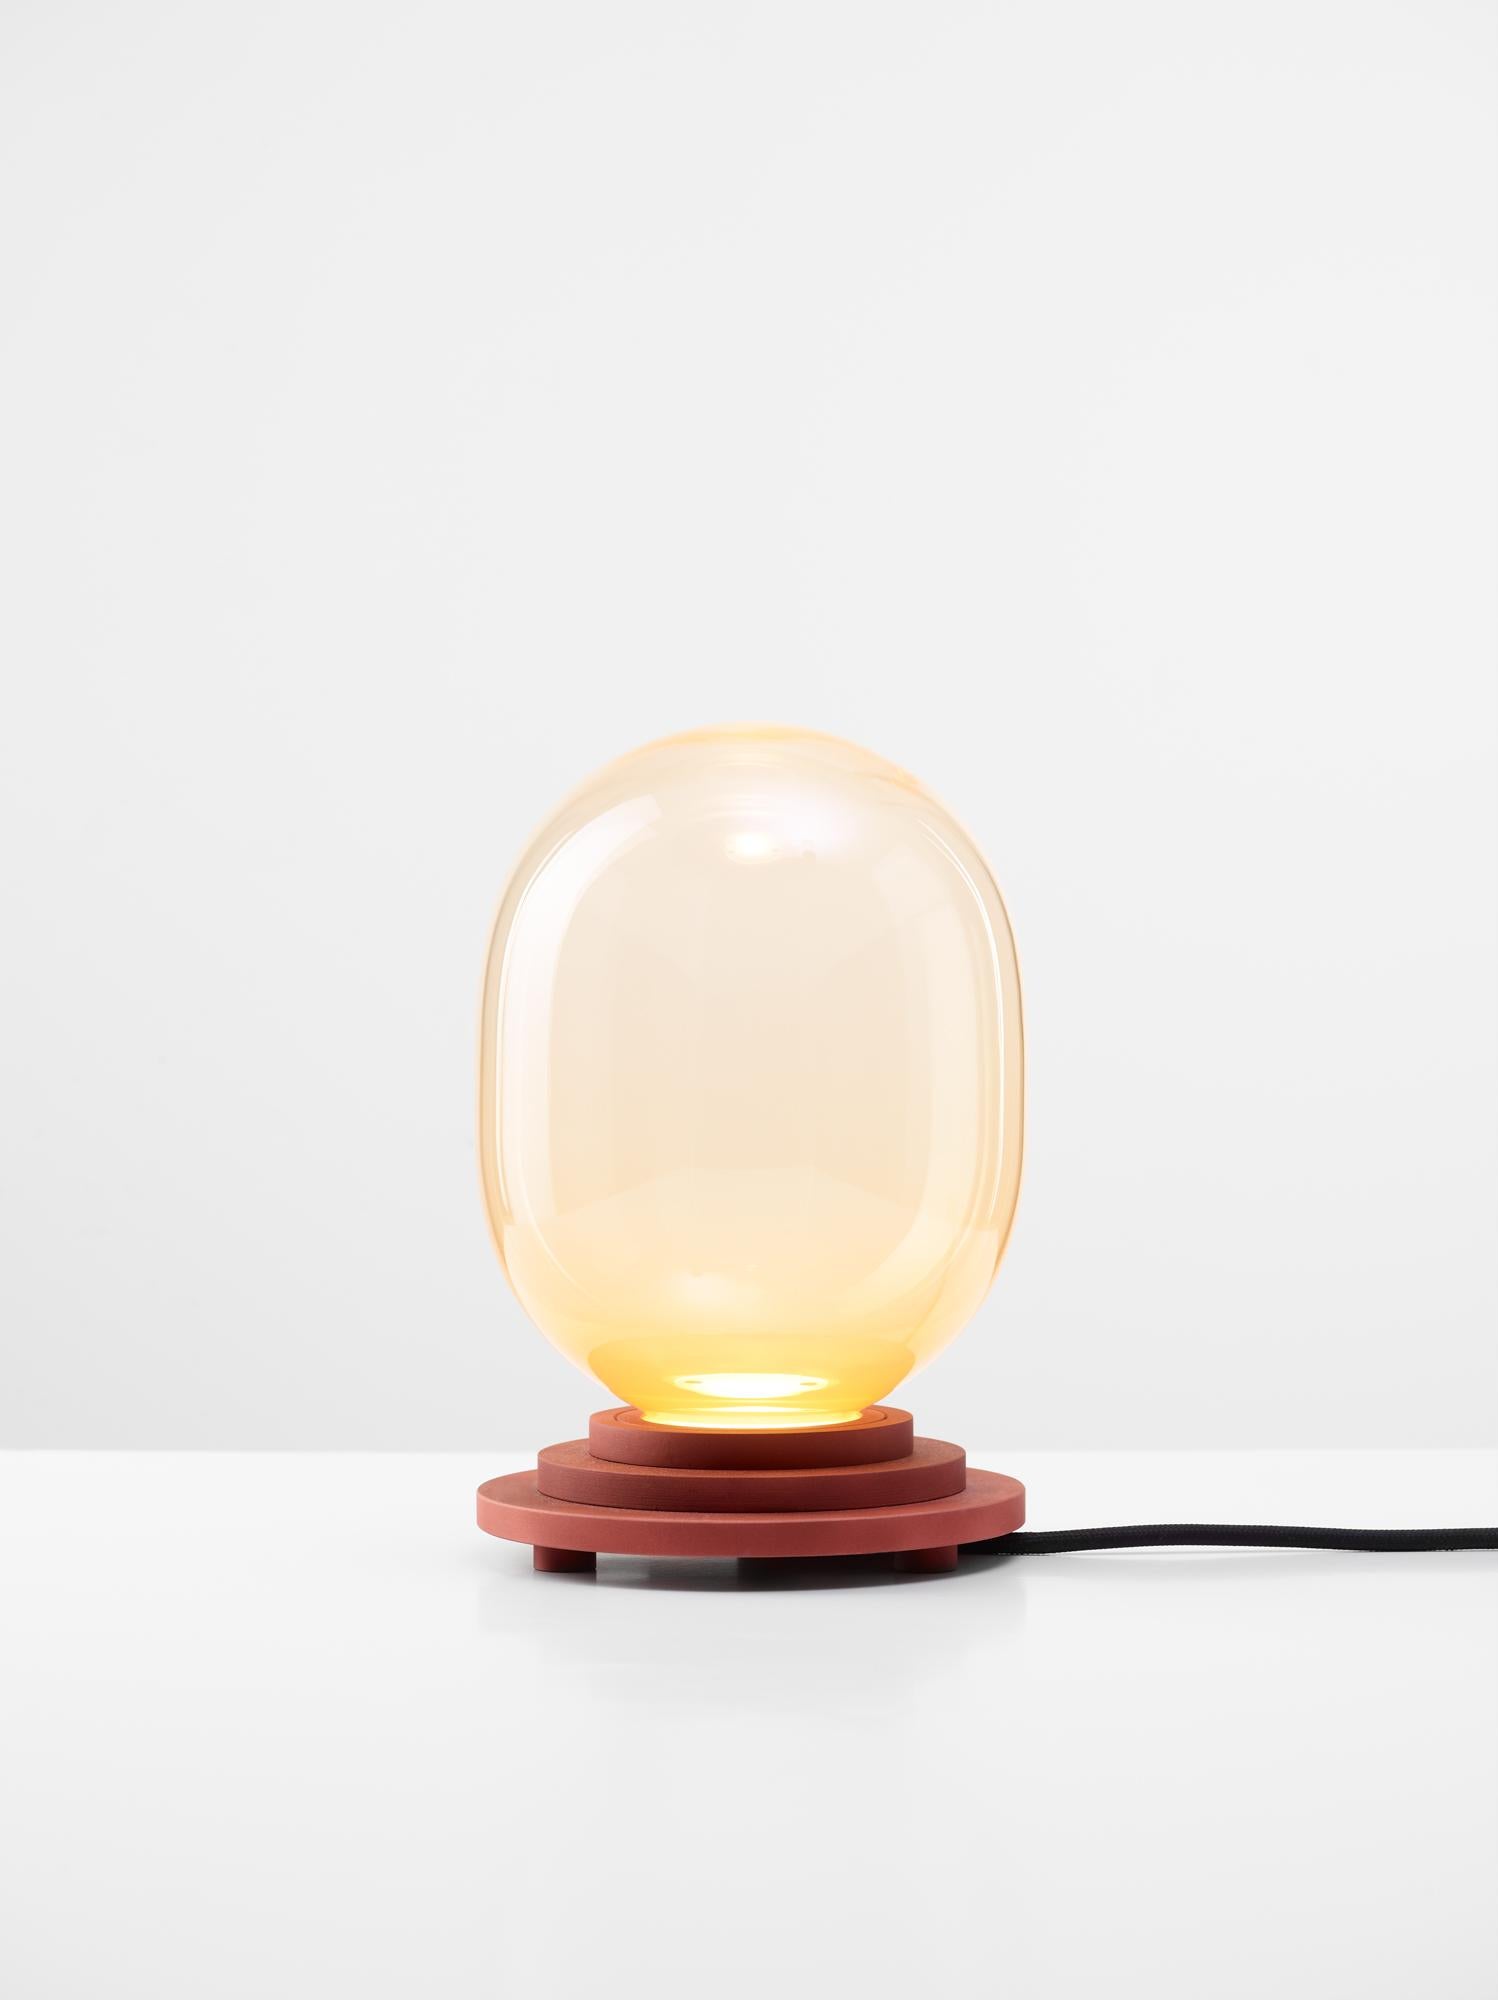 Orange Stratos capsule table light by Dechem Studio
Dimensions: D 15 x H 22 cm
Materials: Aluminum, Glass.
Also available: Different colours available

Different shapes of capsules and spheres contrast with anodized alloy fixtures, creating a